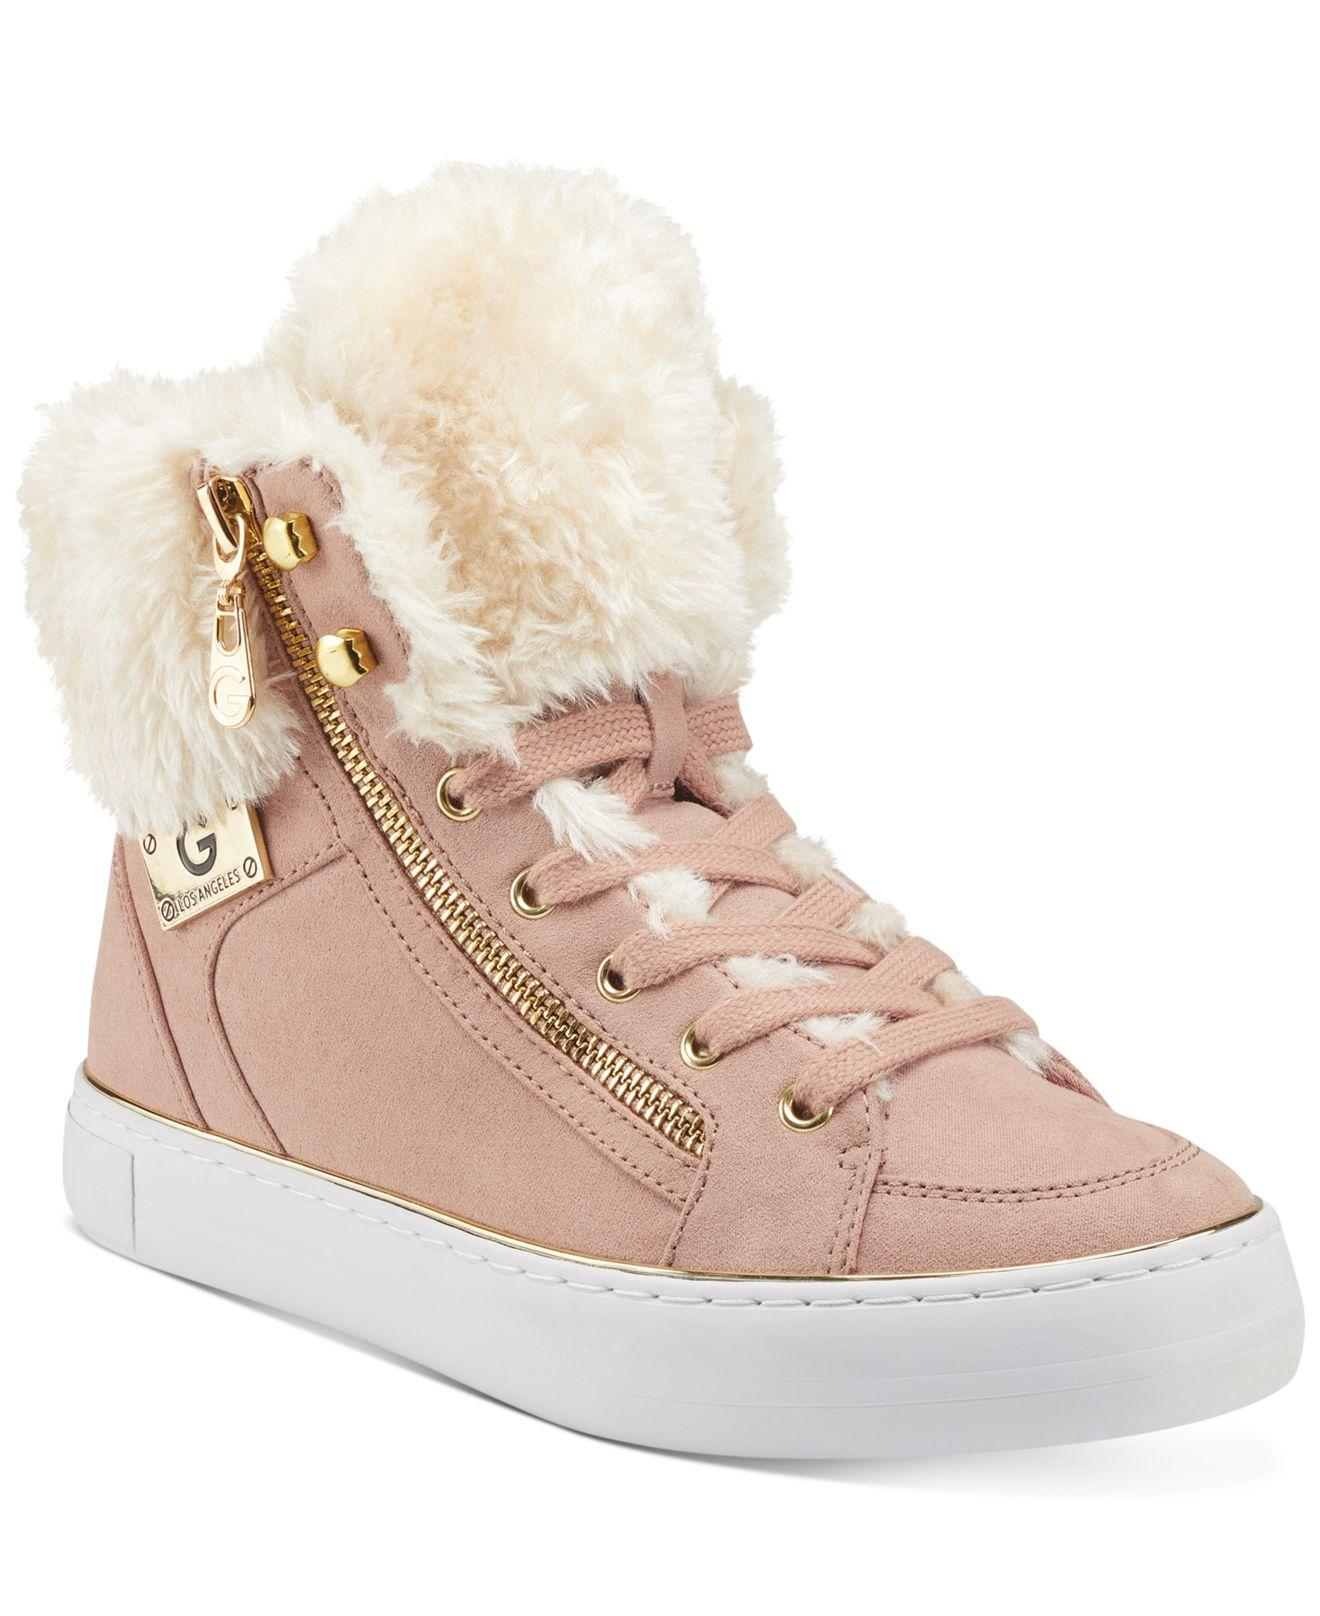 G by Guess Gbg Los Angeles Gabbi Sneakers in Pink | Lyst